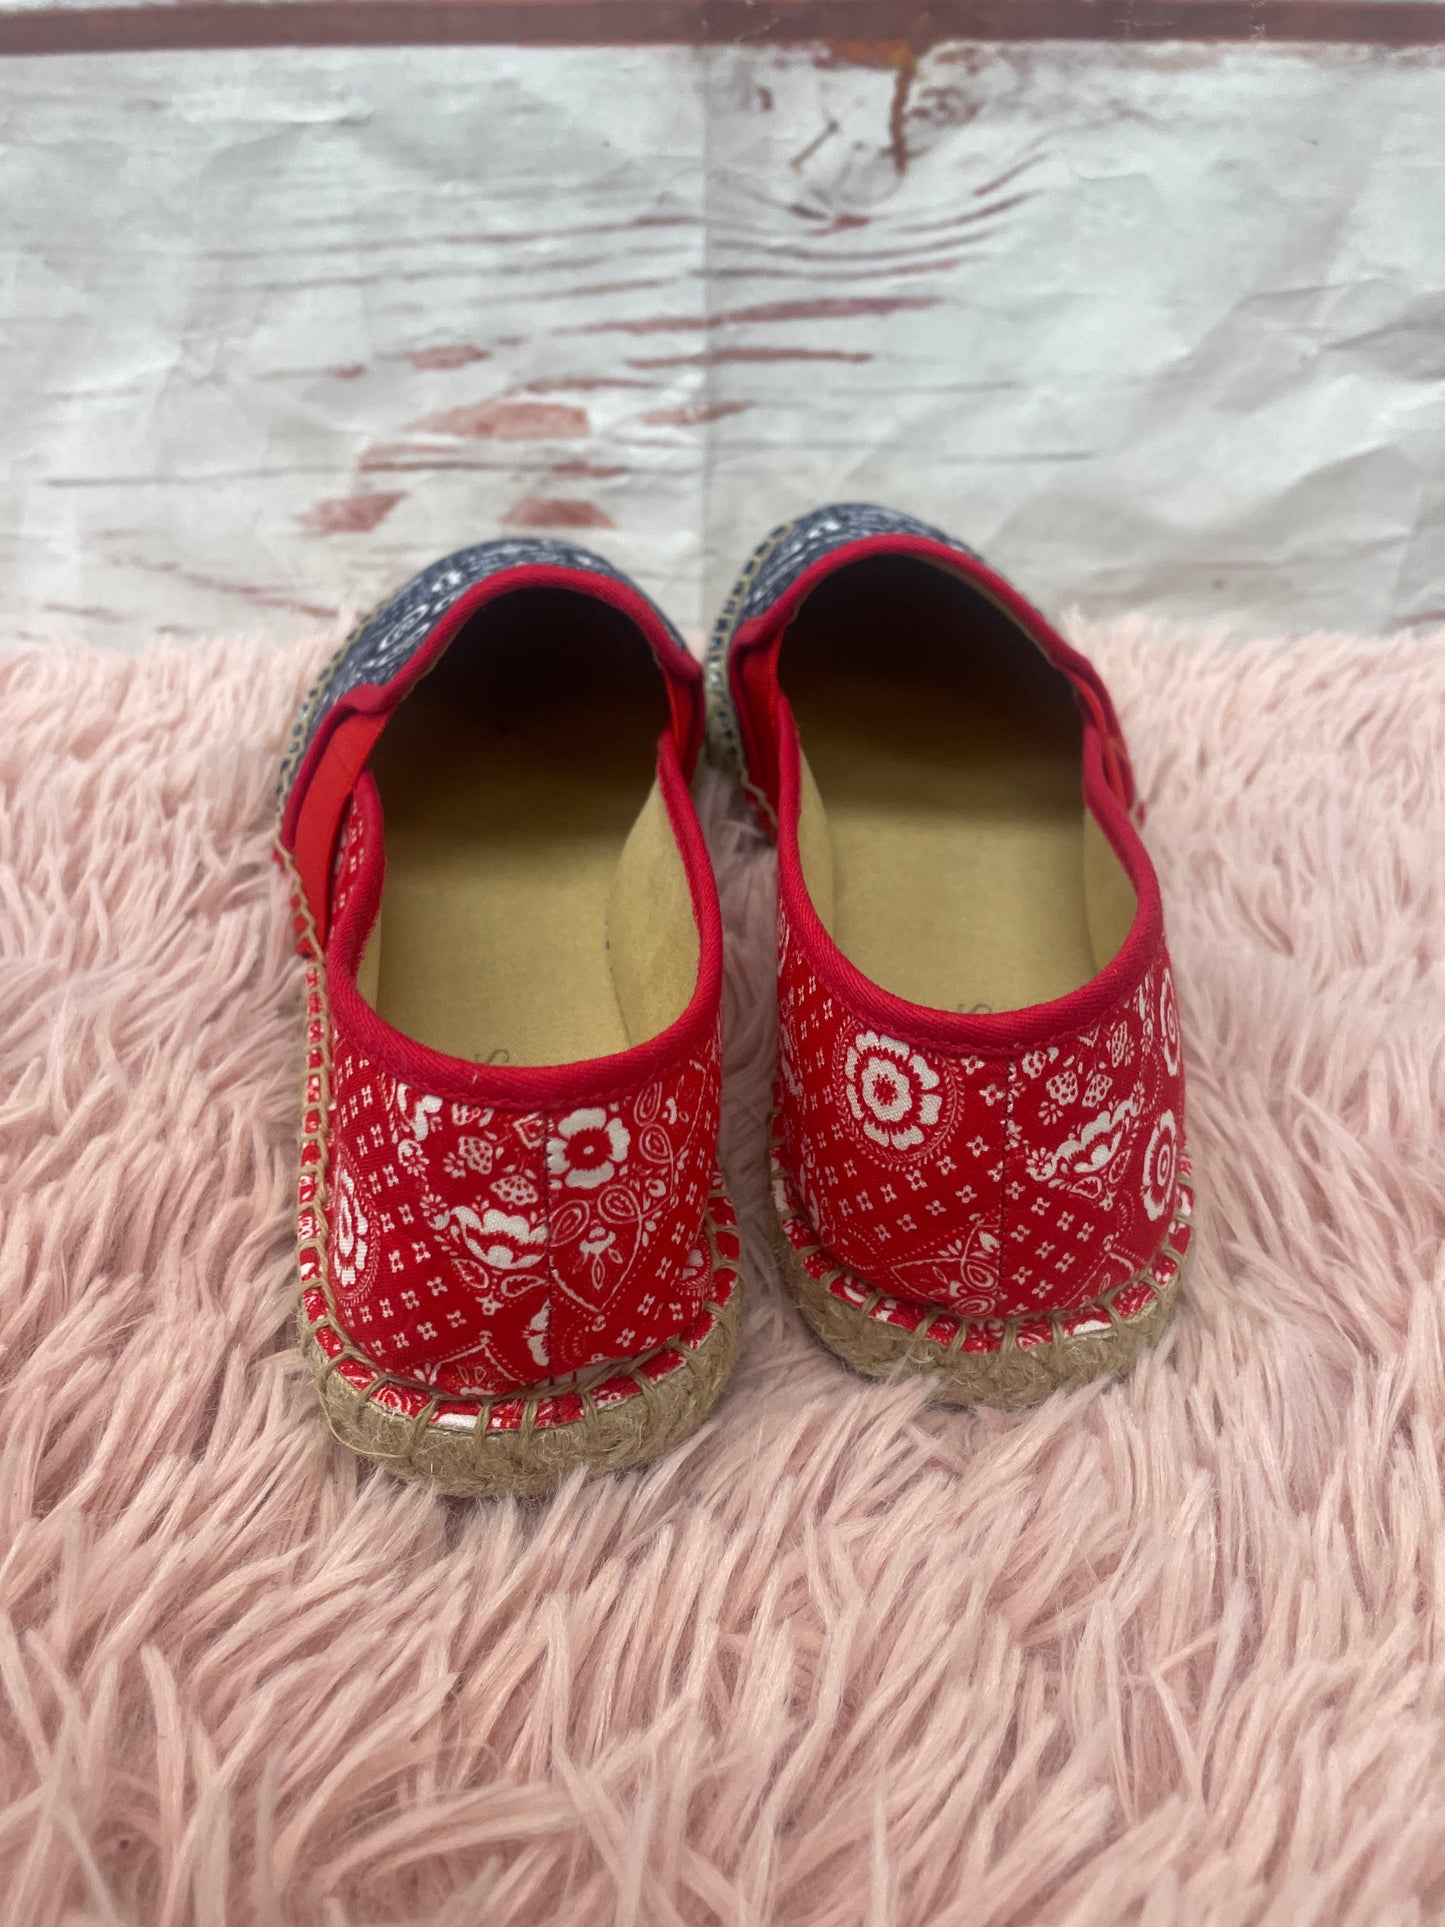 Shoes Flats Espadrille By Talbots  Size: 8